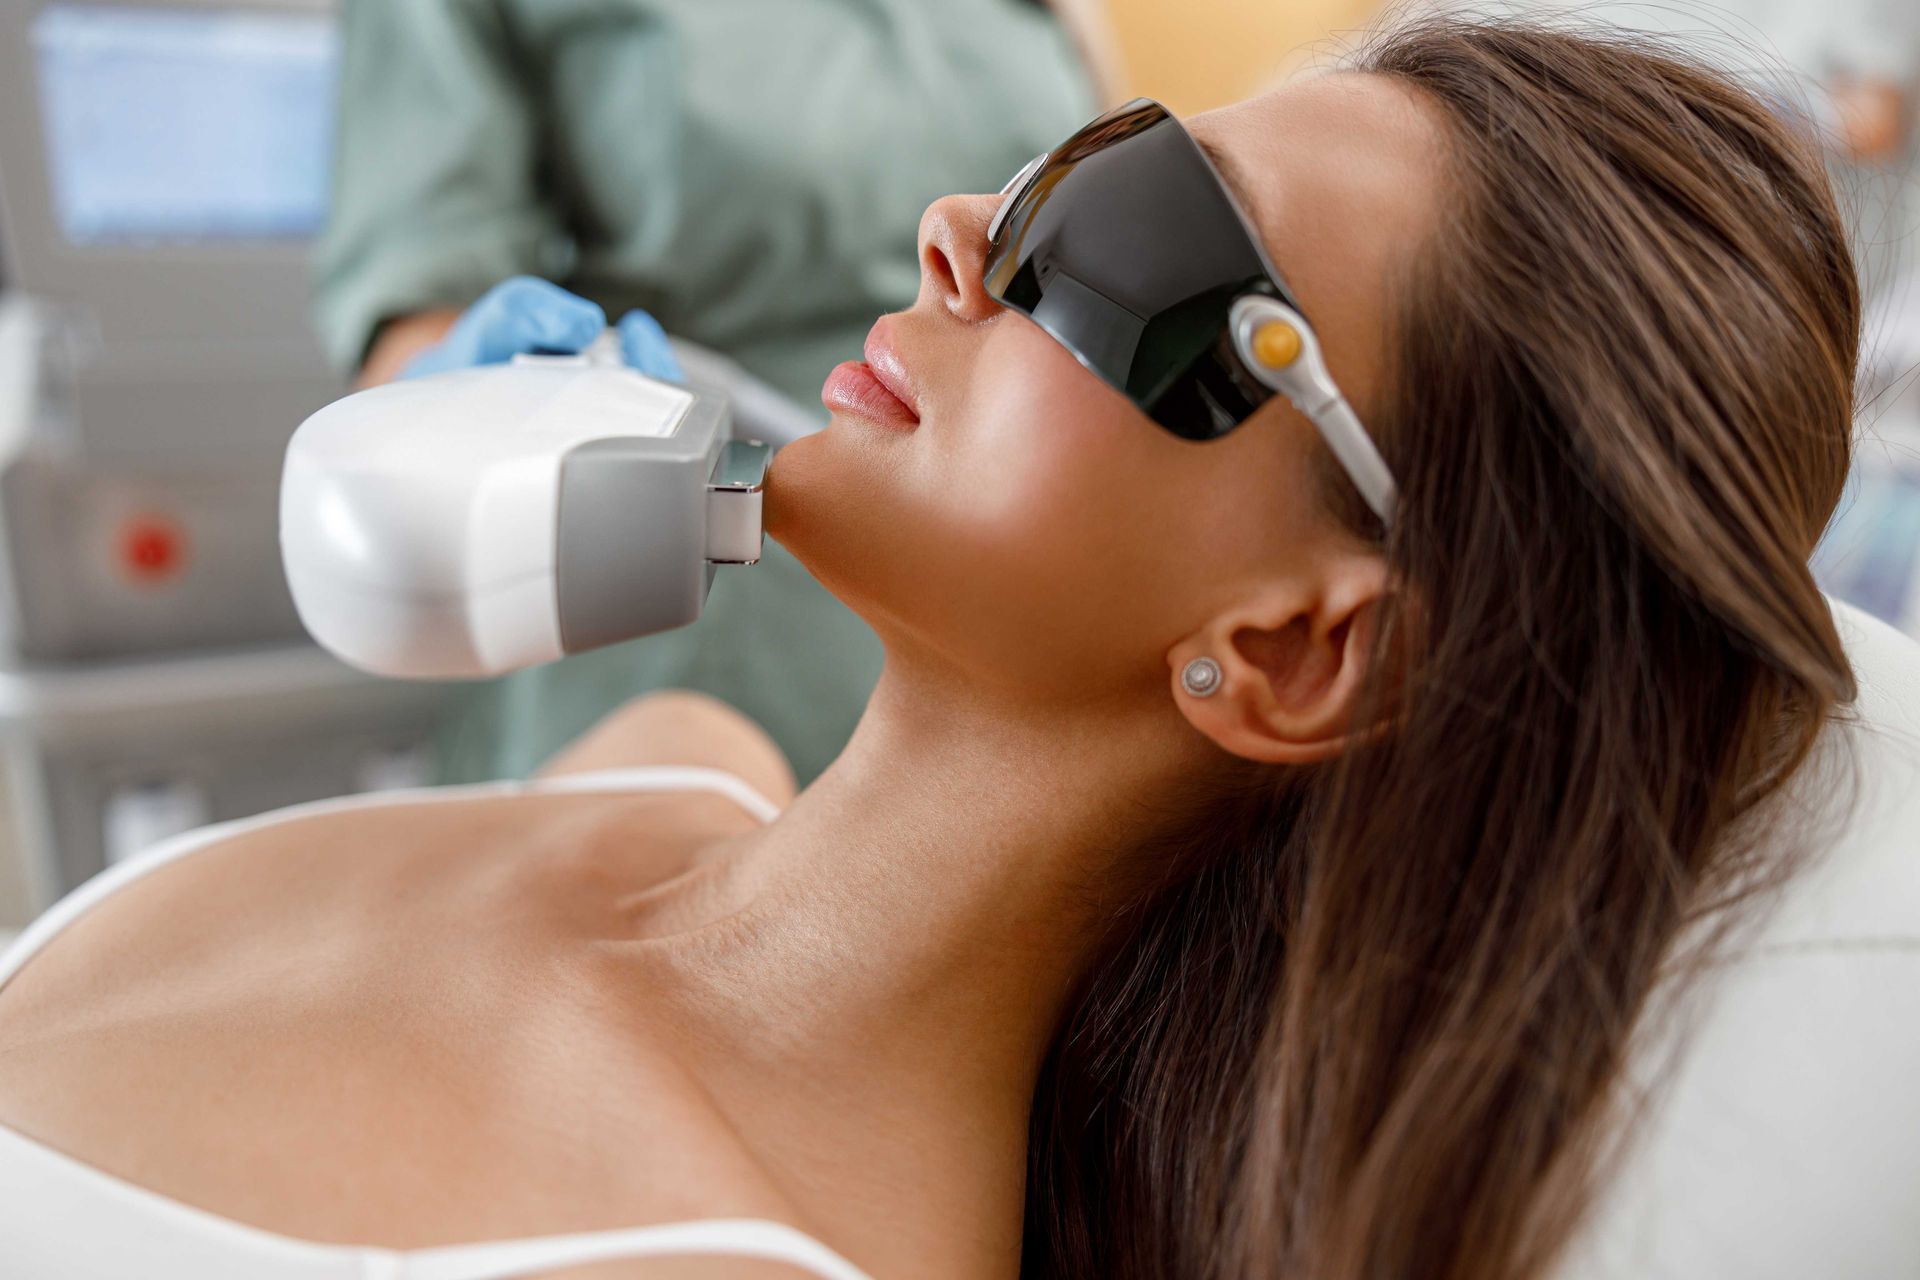 A woman is getting a laser hair removal treatment on her face